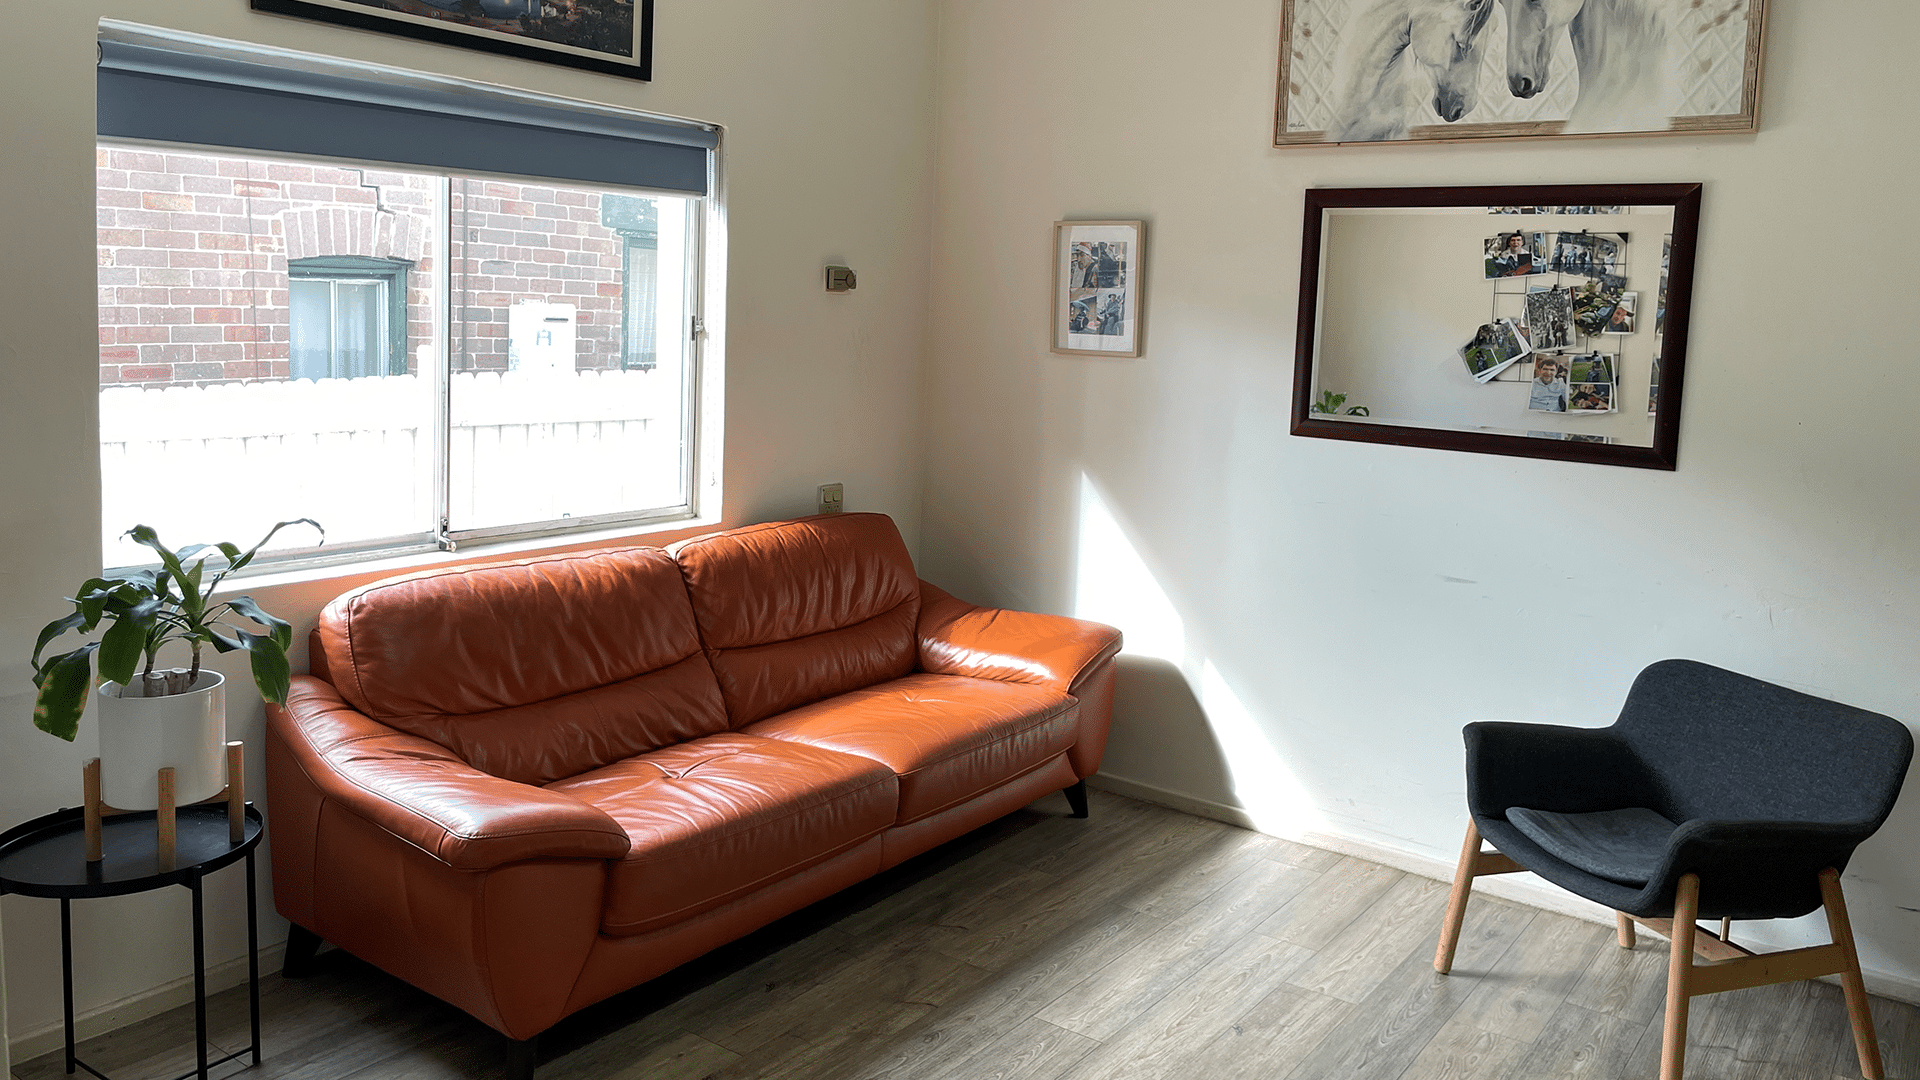 View of a sun filled corner of the lounge room with a leather couch under a window.